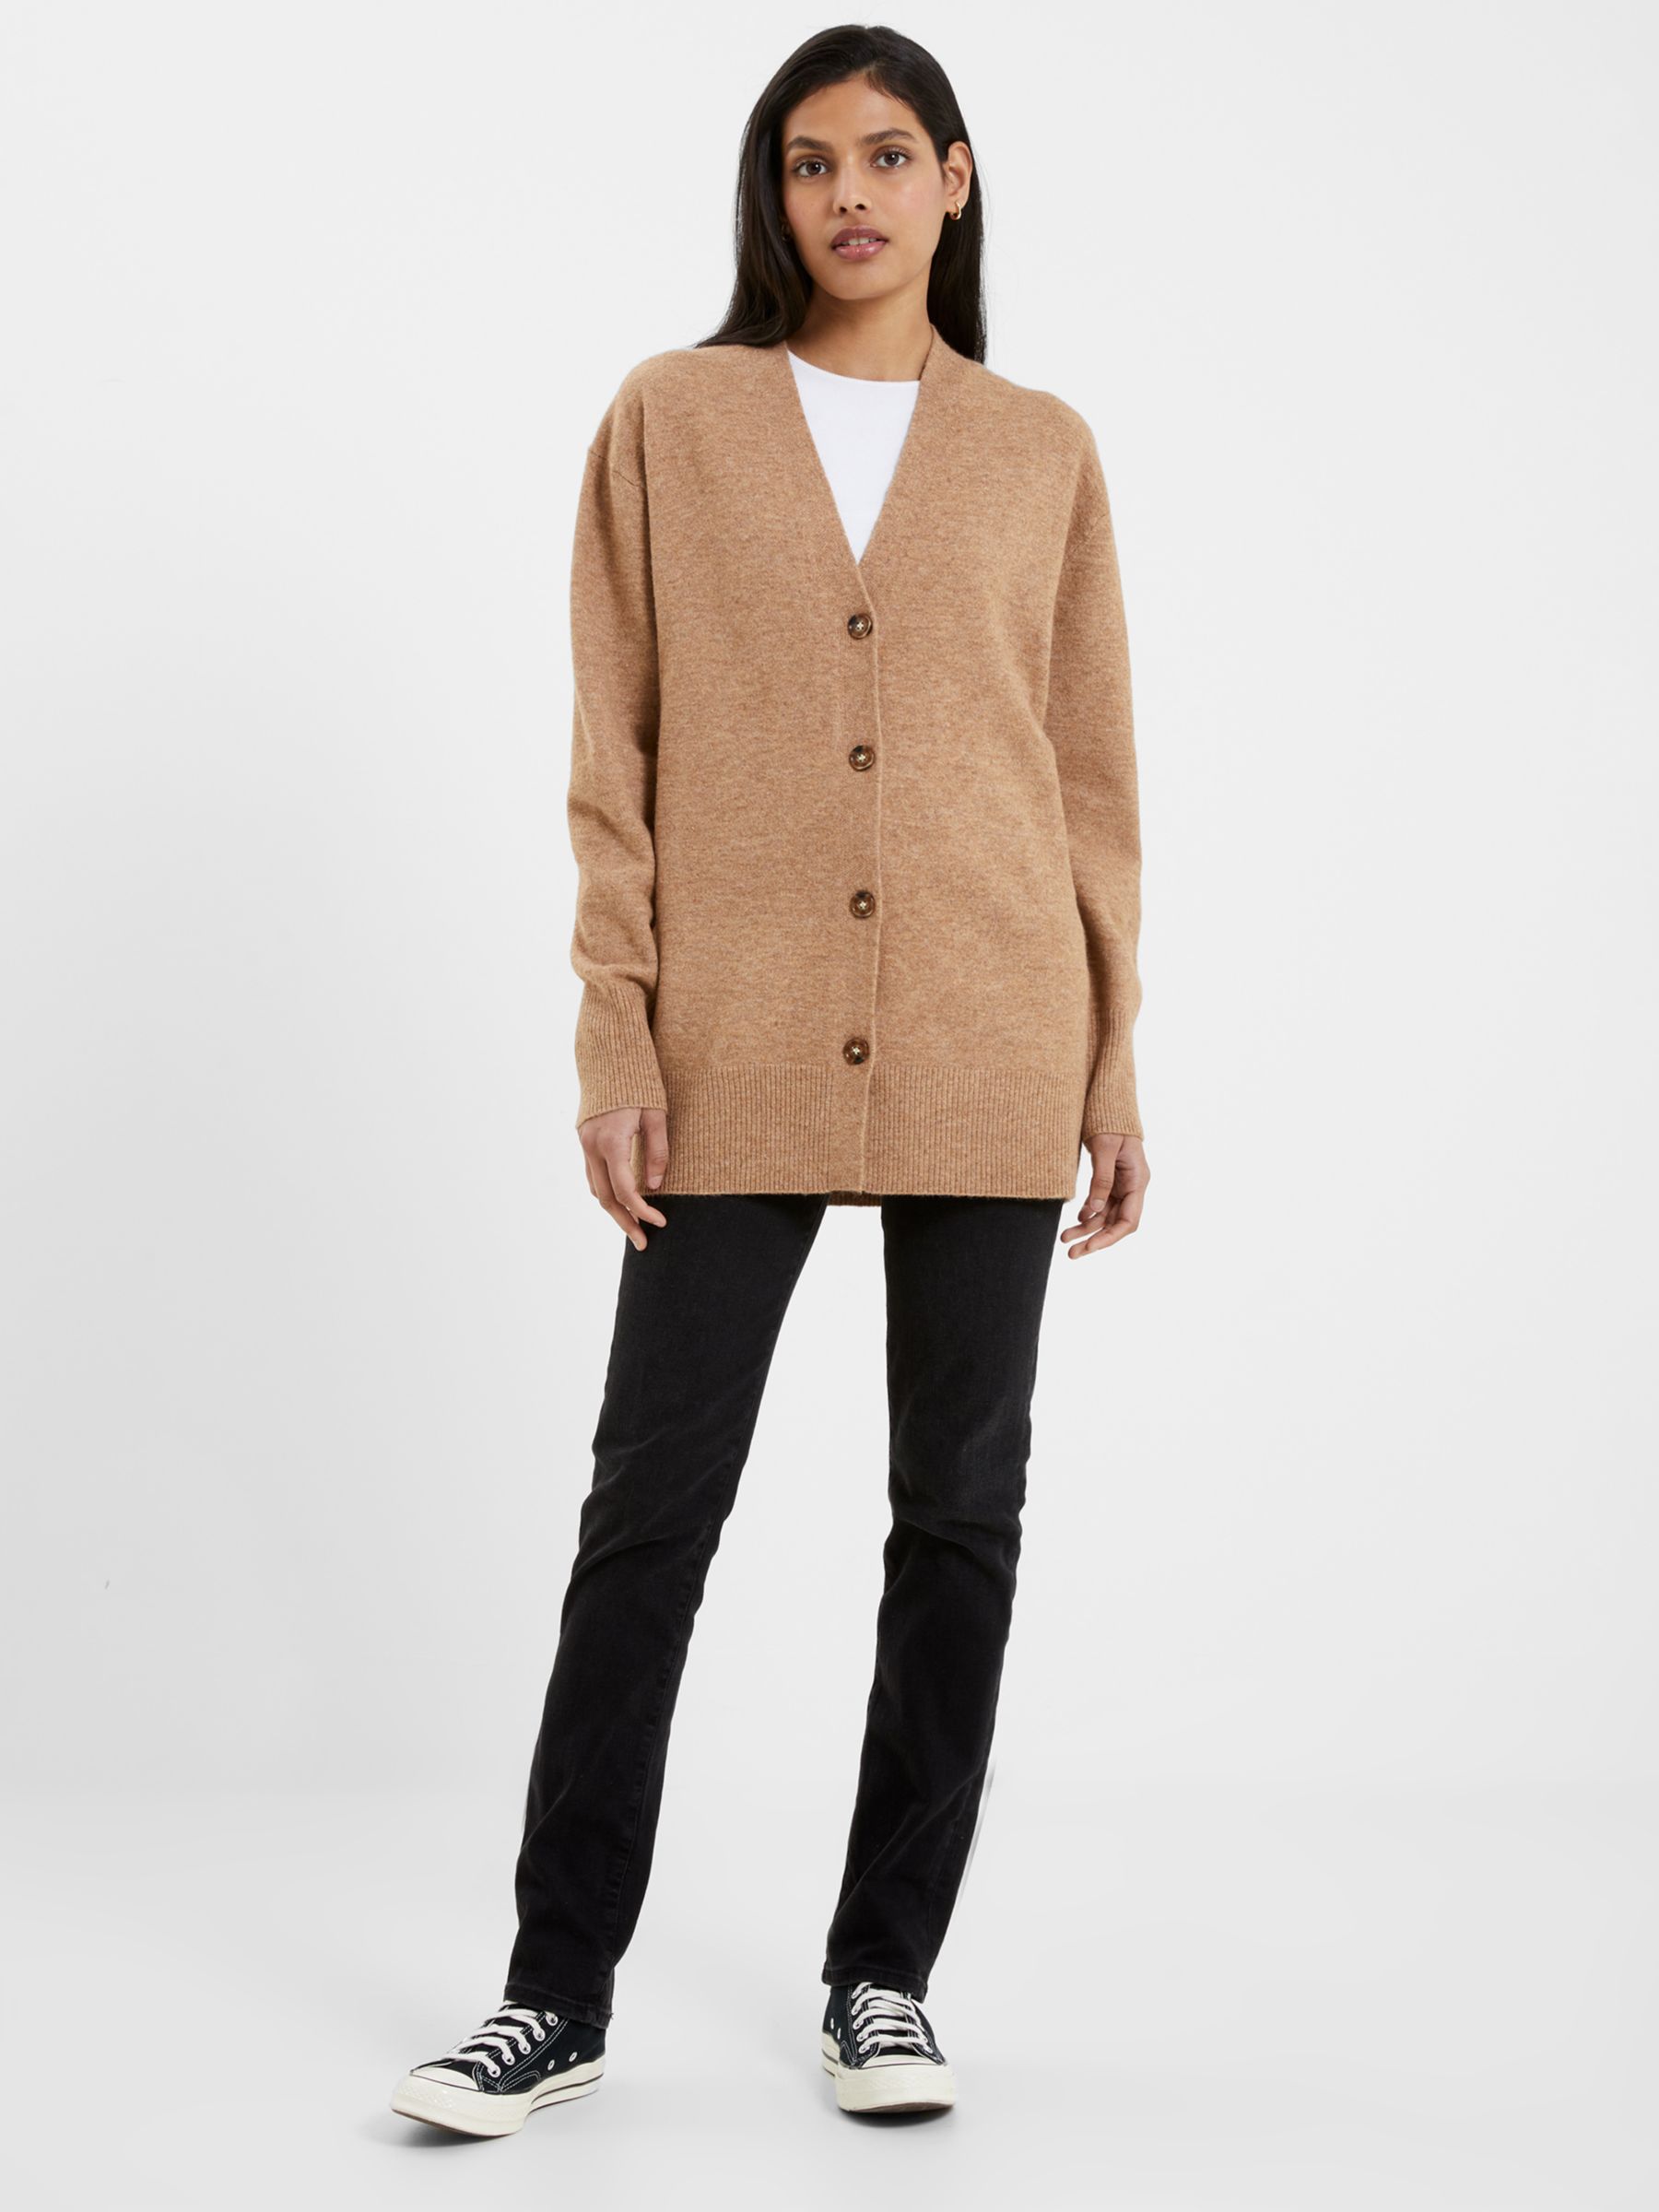 French Connection Vhari Knit Cardigan